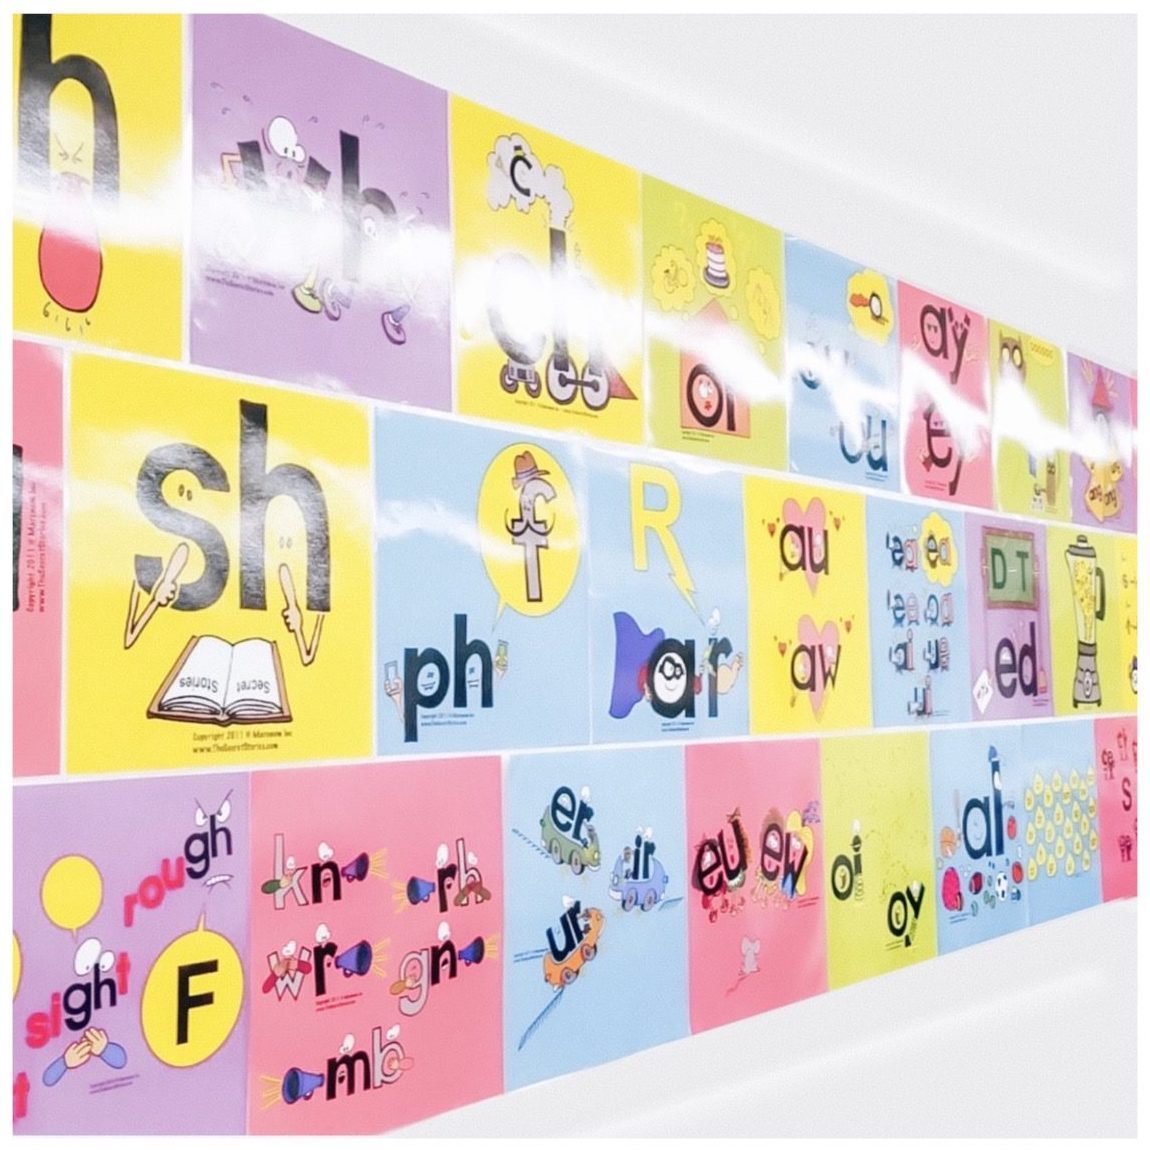 16 Teacher Created Phonics Classroom Posters Guided Reading; Home School 